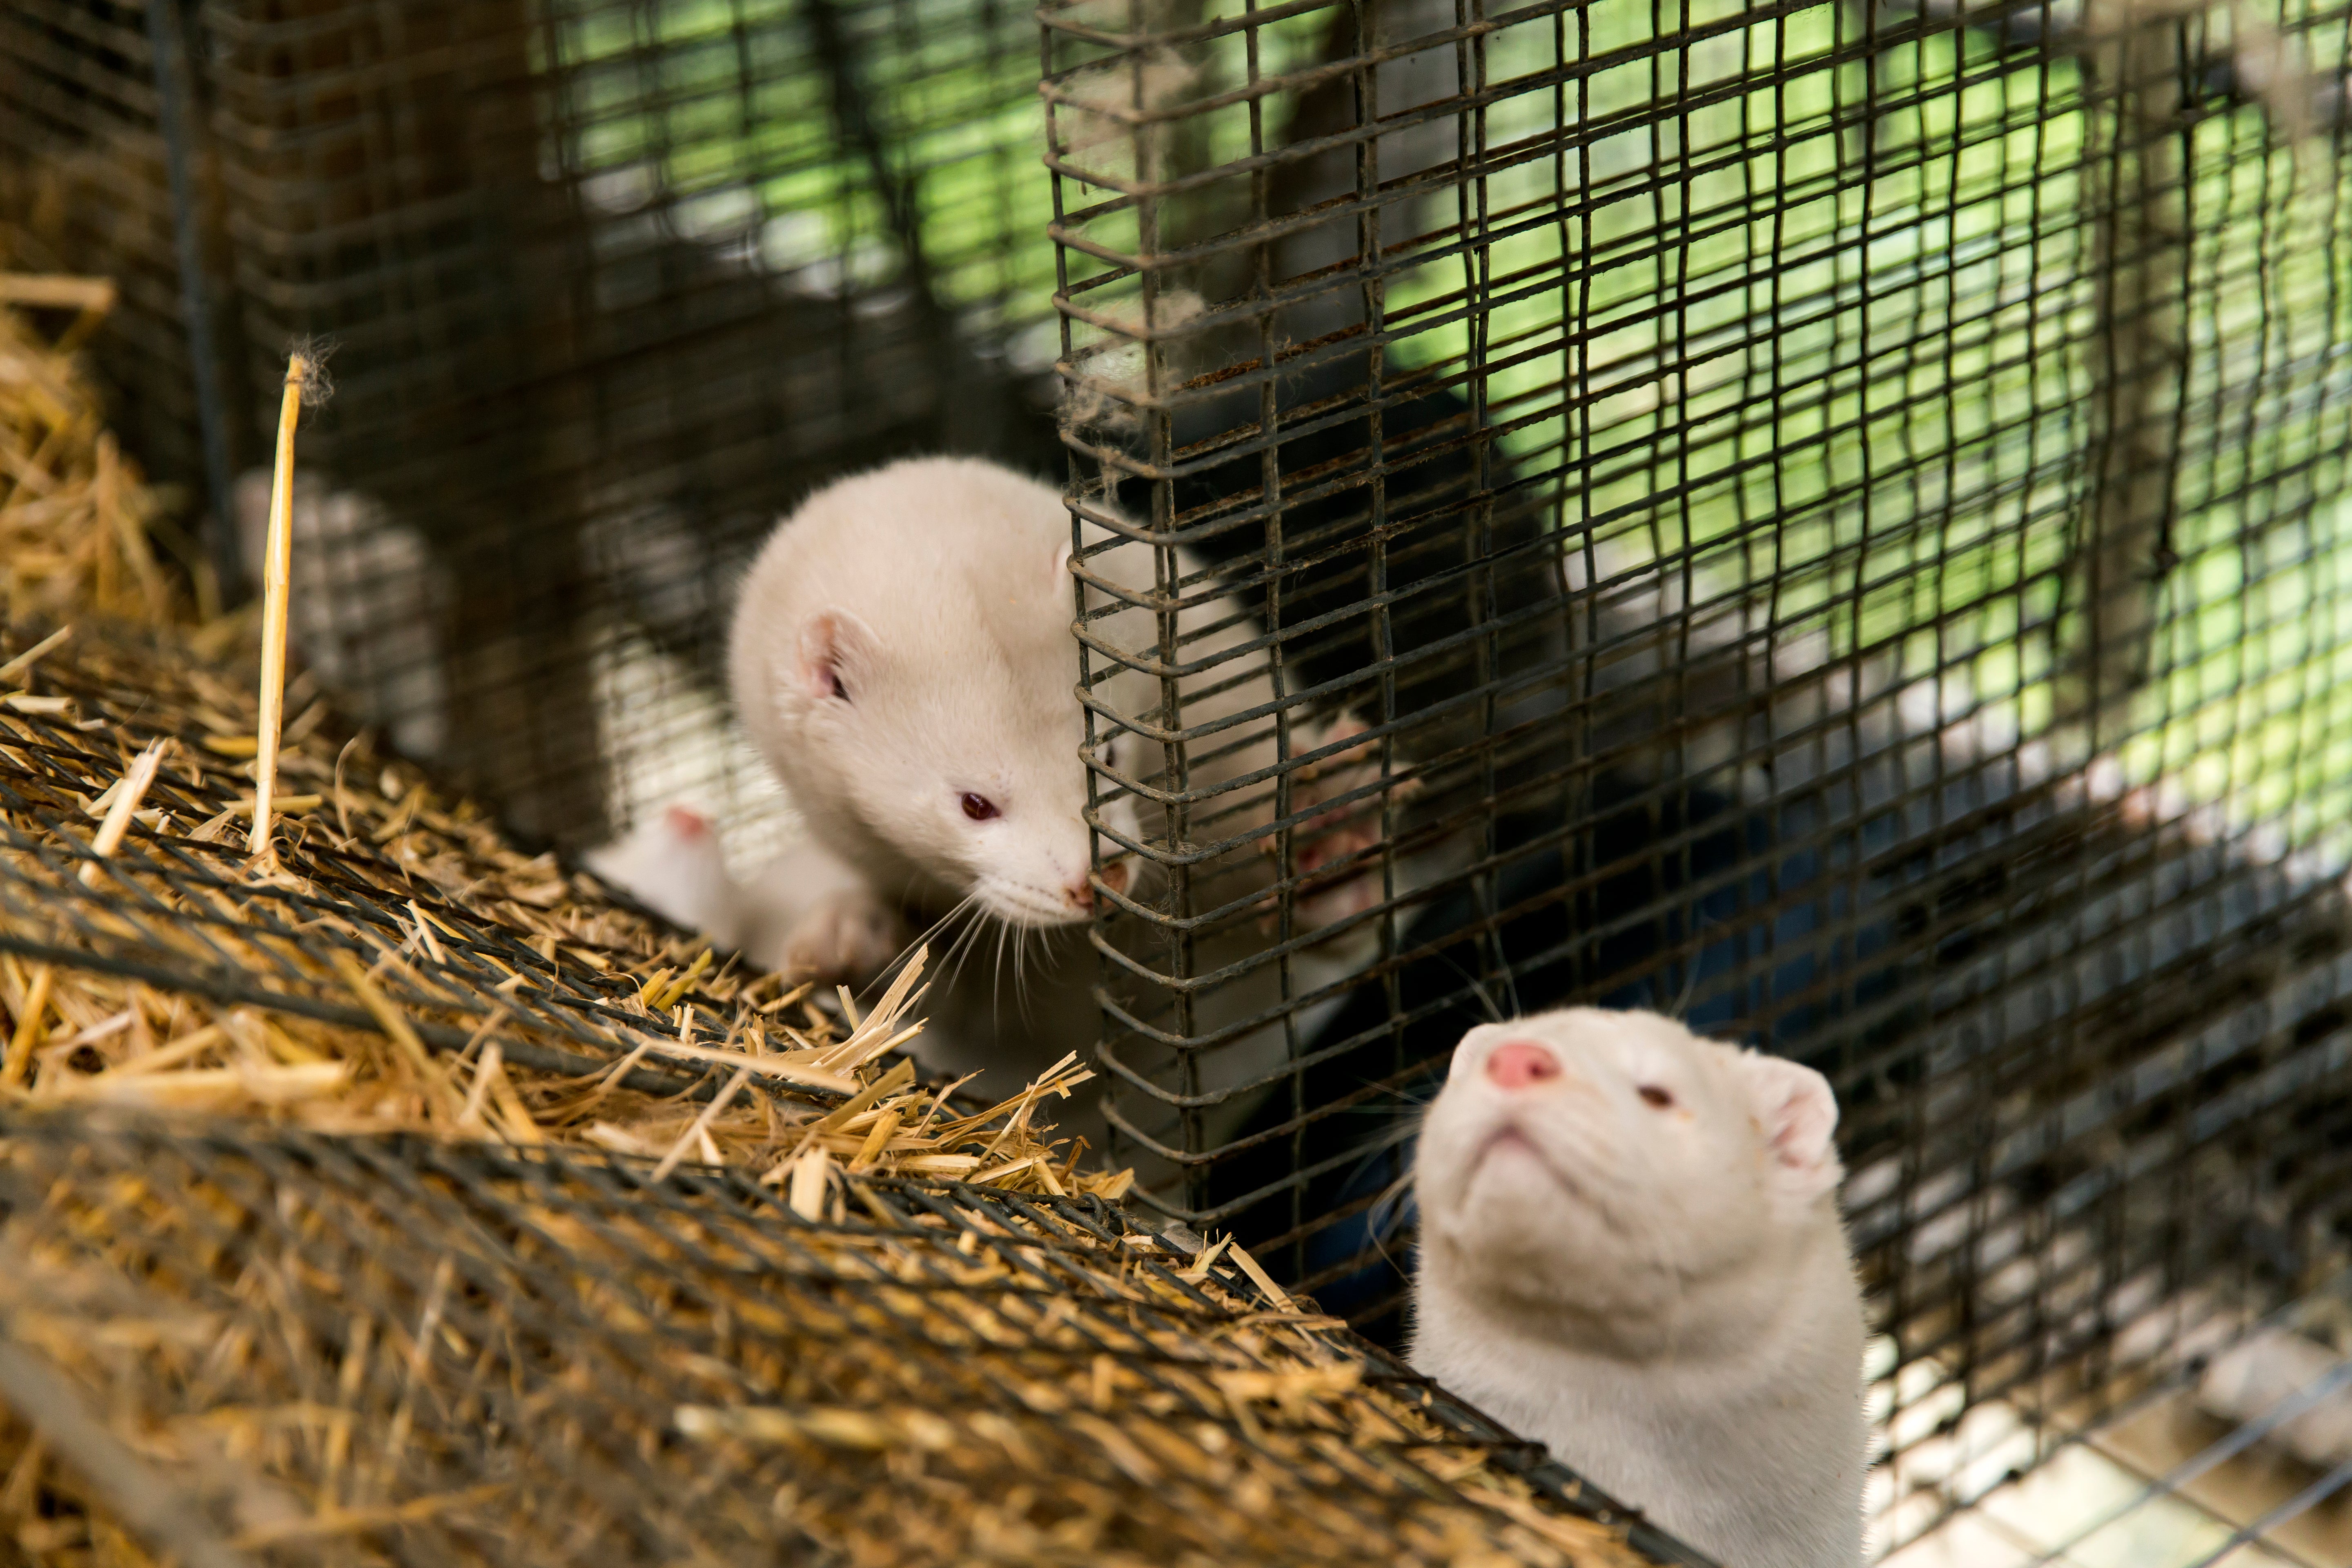 The Danish government ordered the culling of all 17m mink in its fur farms